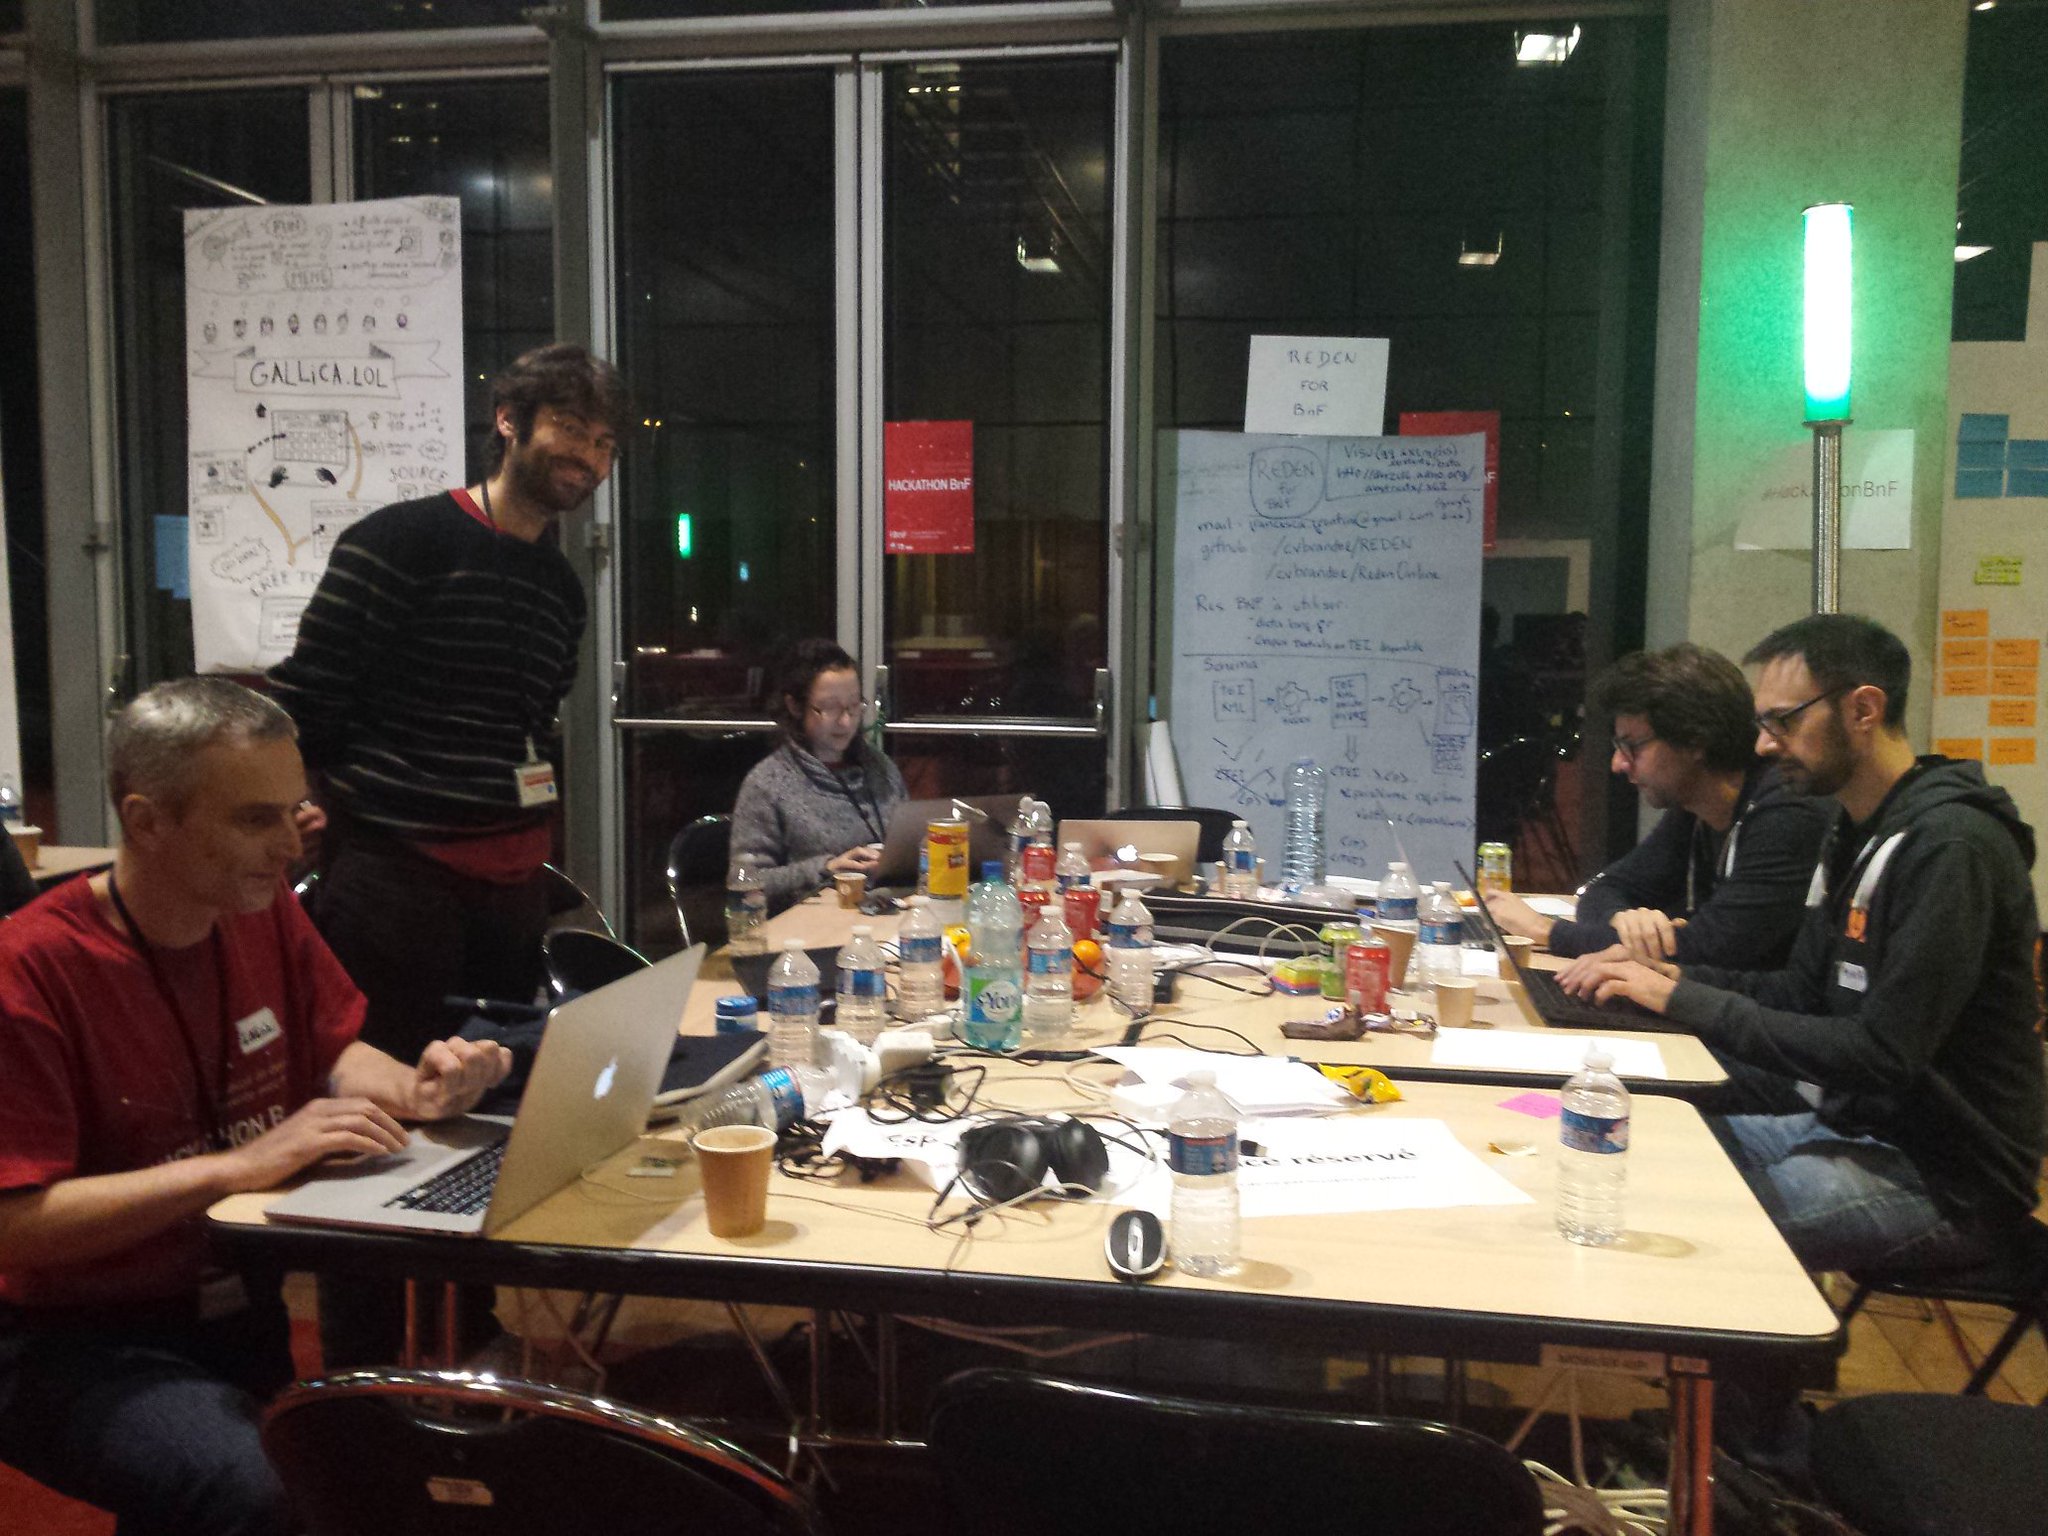 Hacking the night away... #hackathonBnF #reden4bnf https://t.co/P3YSjRr67n